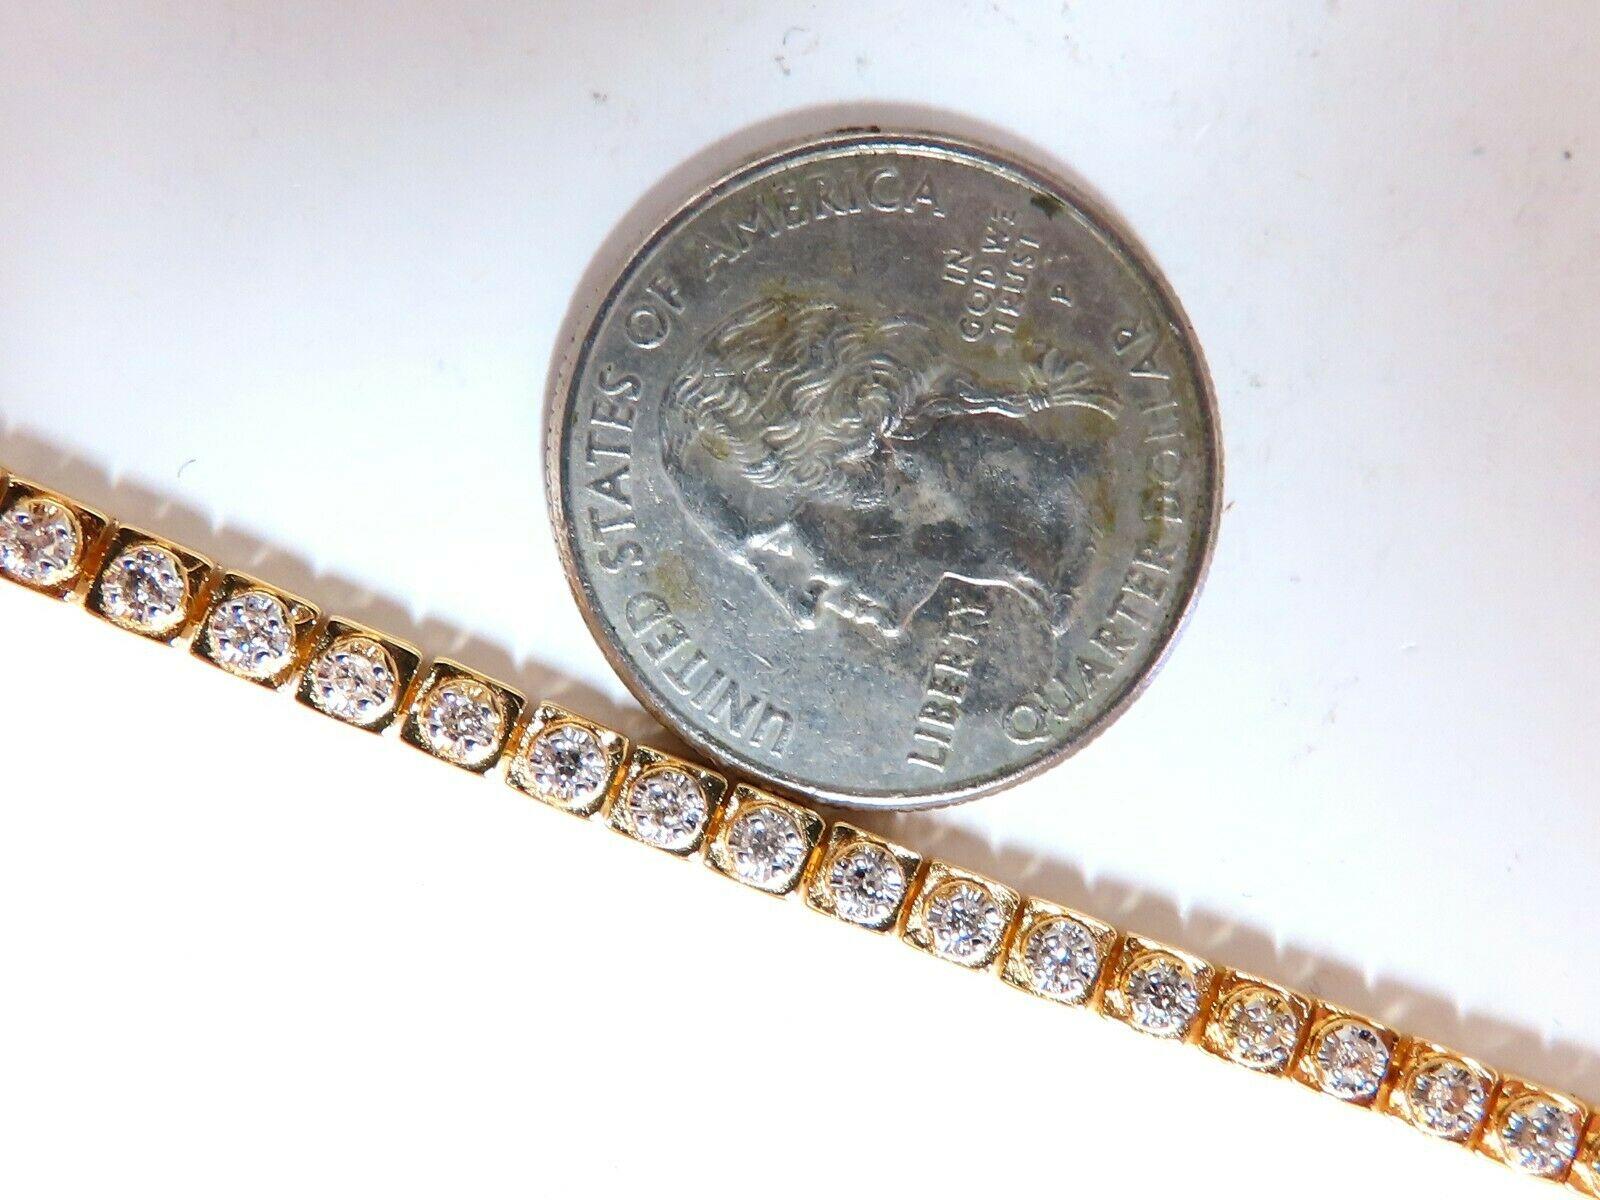 Vintage Style Tennis Bracelet


1.04ct. natural diamonds.
Rounds, Full cut brilliants

H colors Vs-2 clarity.

14kt. yellow gold

13.3 Grams.

7.5 Inches long

3.3mm wide

Appraisal to accompany $4000